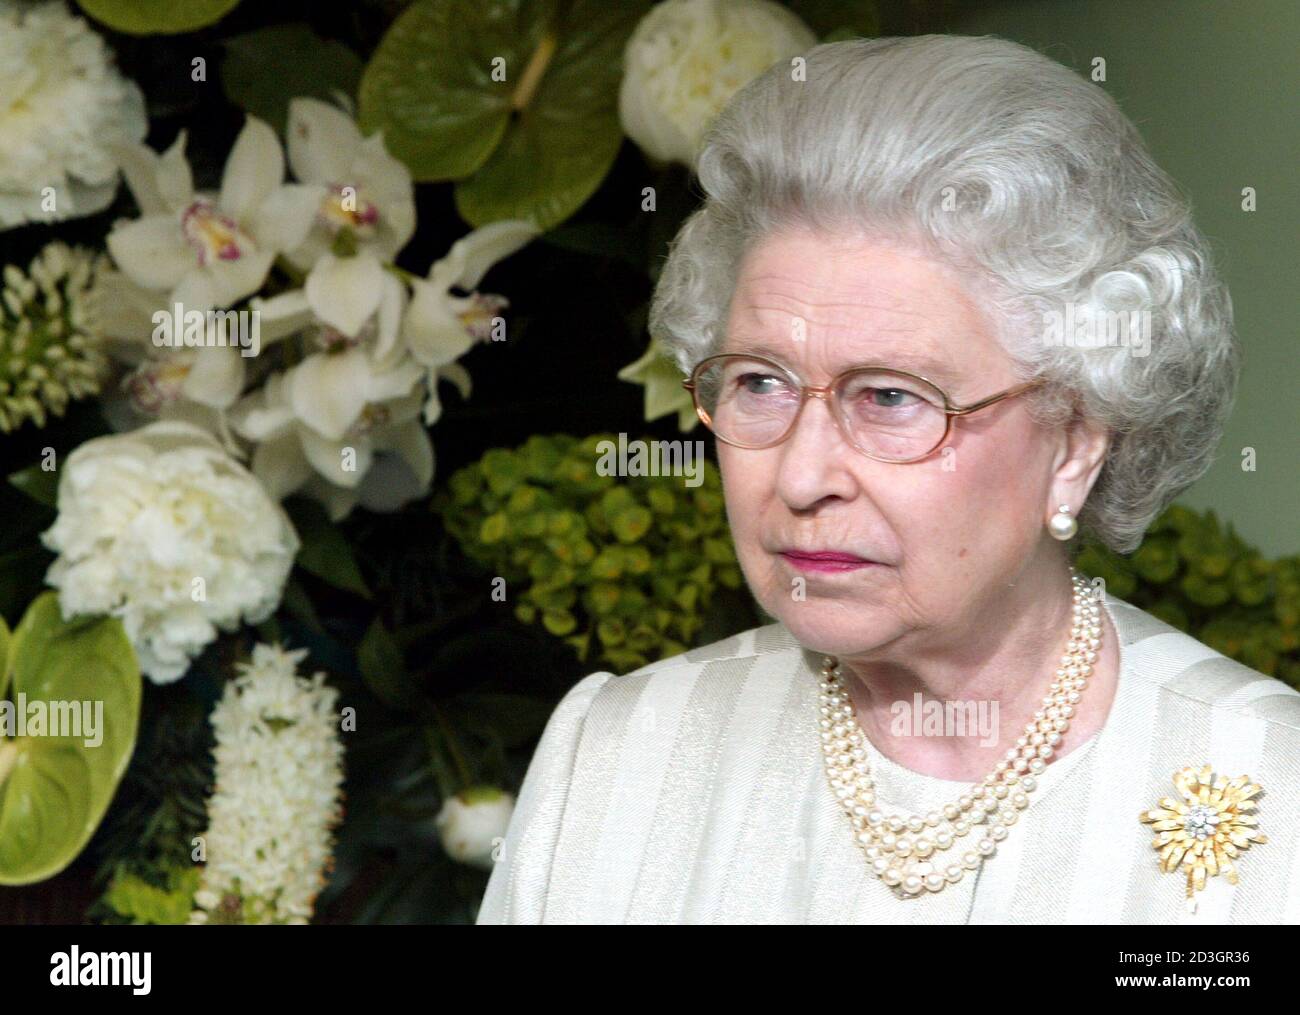 Britain's Queen Elizabeth II examines exhibits during her visit to the Royal Horticultural Society's Chelsea Flower Show in London May 19, 2003.  Thousands of visitors are expected to attend the 81st annual show, organised by the Royal Horticultural Society and held at the Royal Hospital in Chelsea, west London. Stock Photo